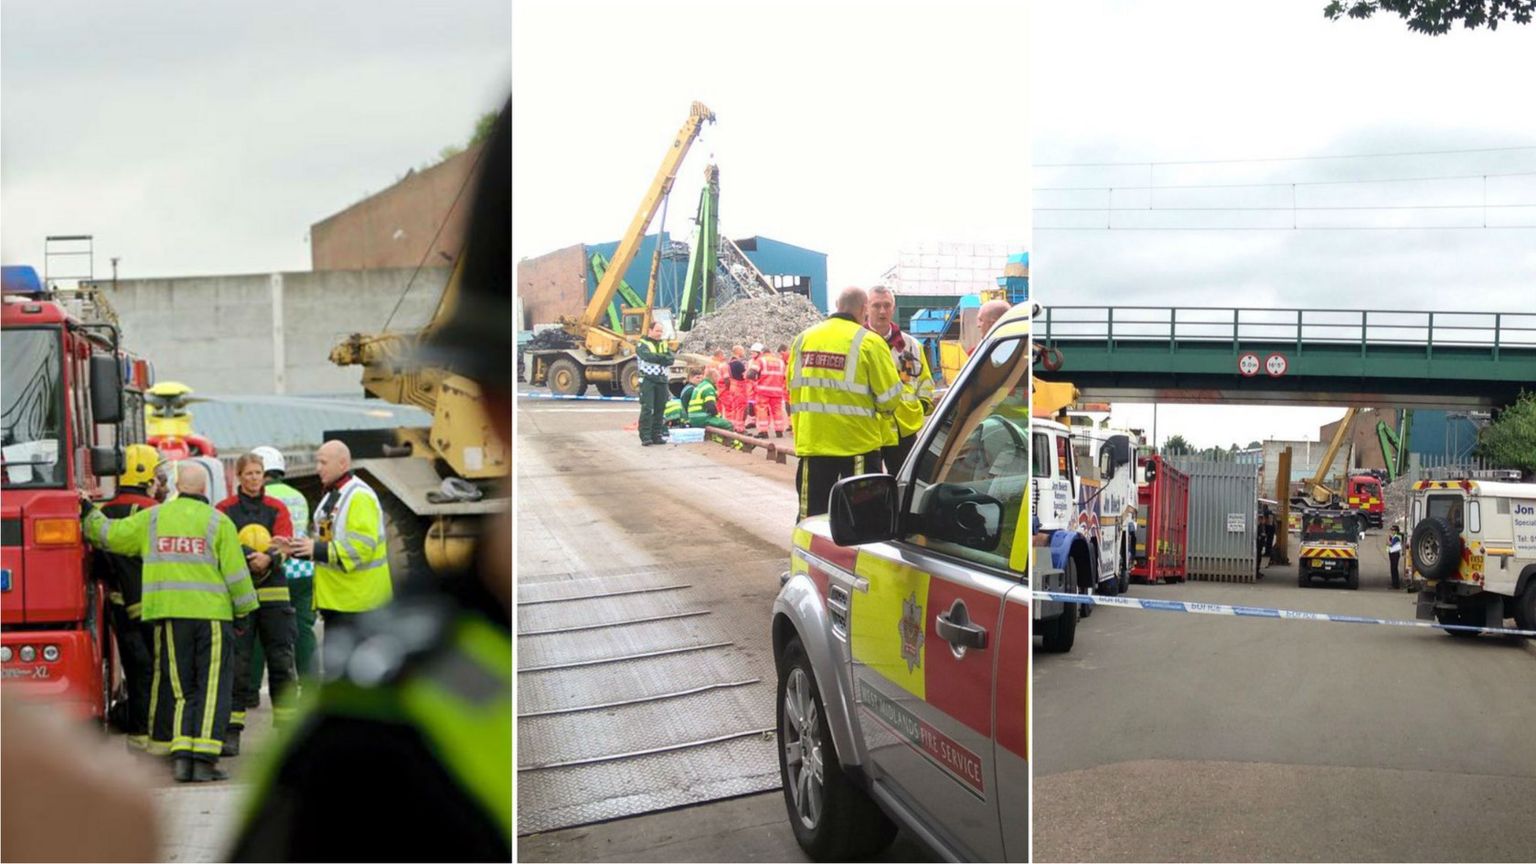 Nechells recycling plant incident